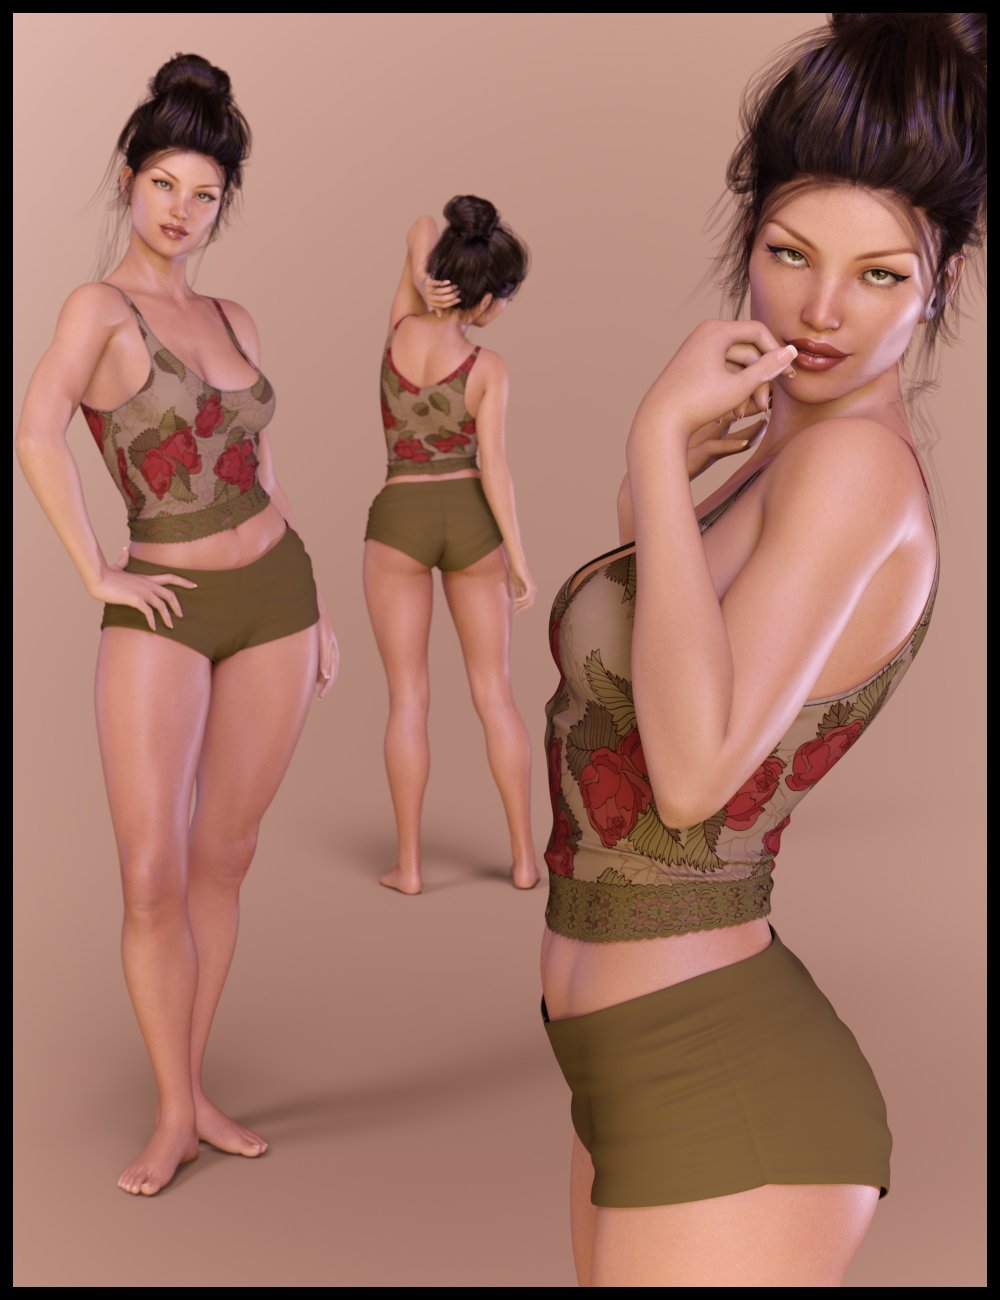 thankful for these poses | Daz 3D